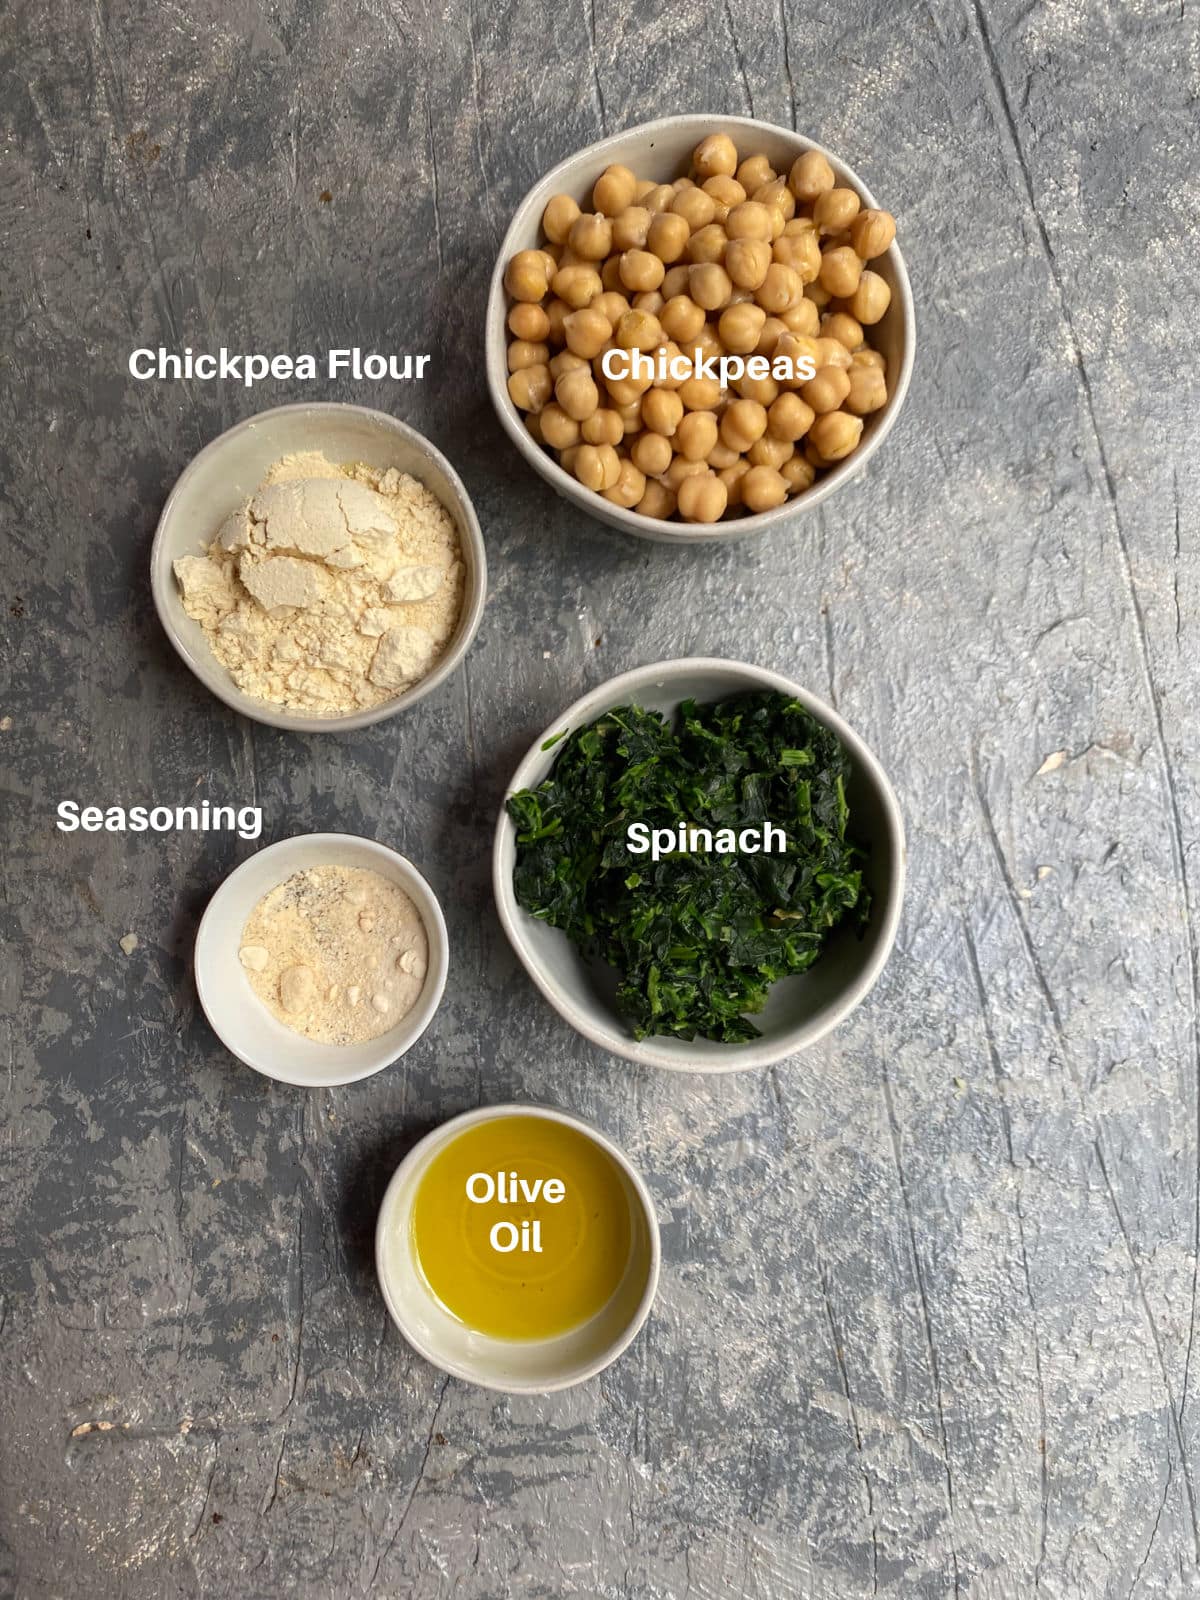 Spinach meatballs recipe ingredients labeled
